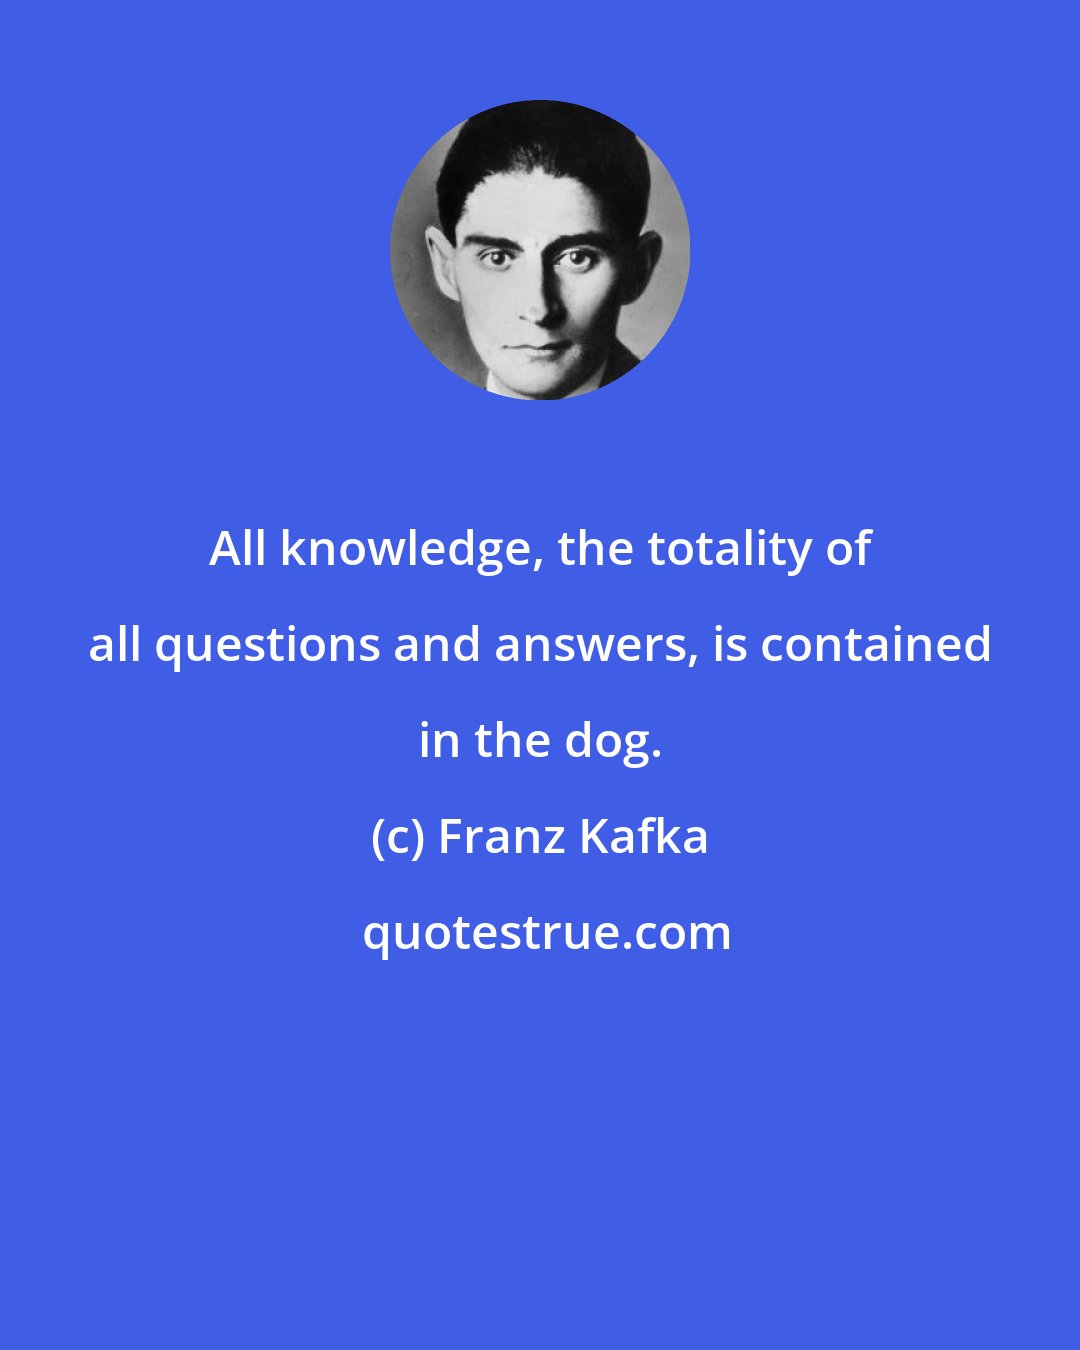 Franz Kafka: All knowledge, the totality of all questions and answers, is contained in the dog.